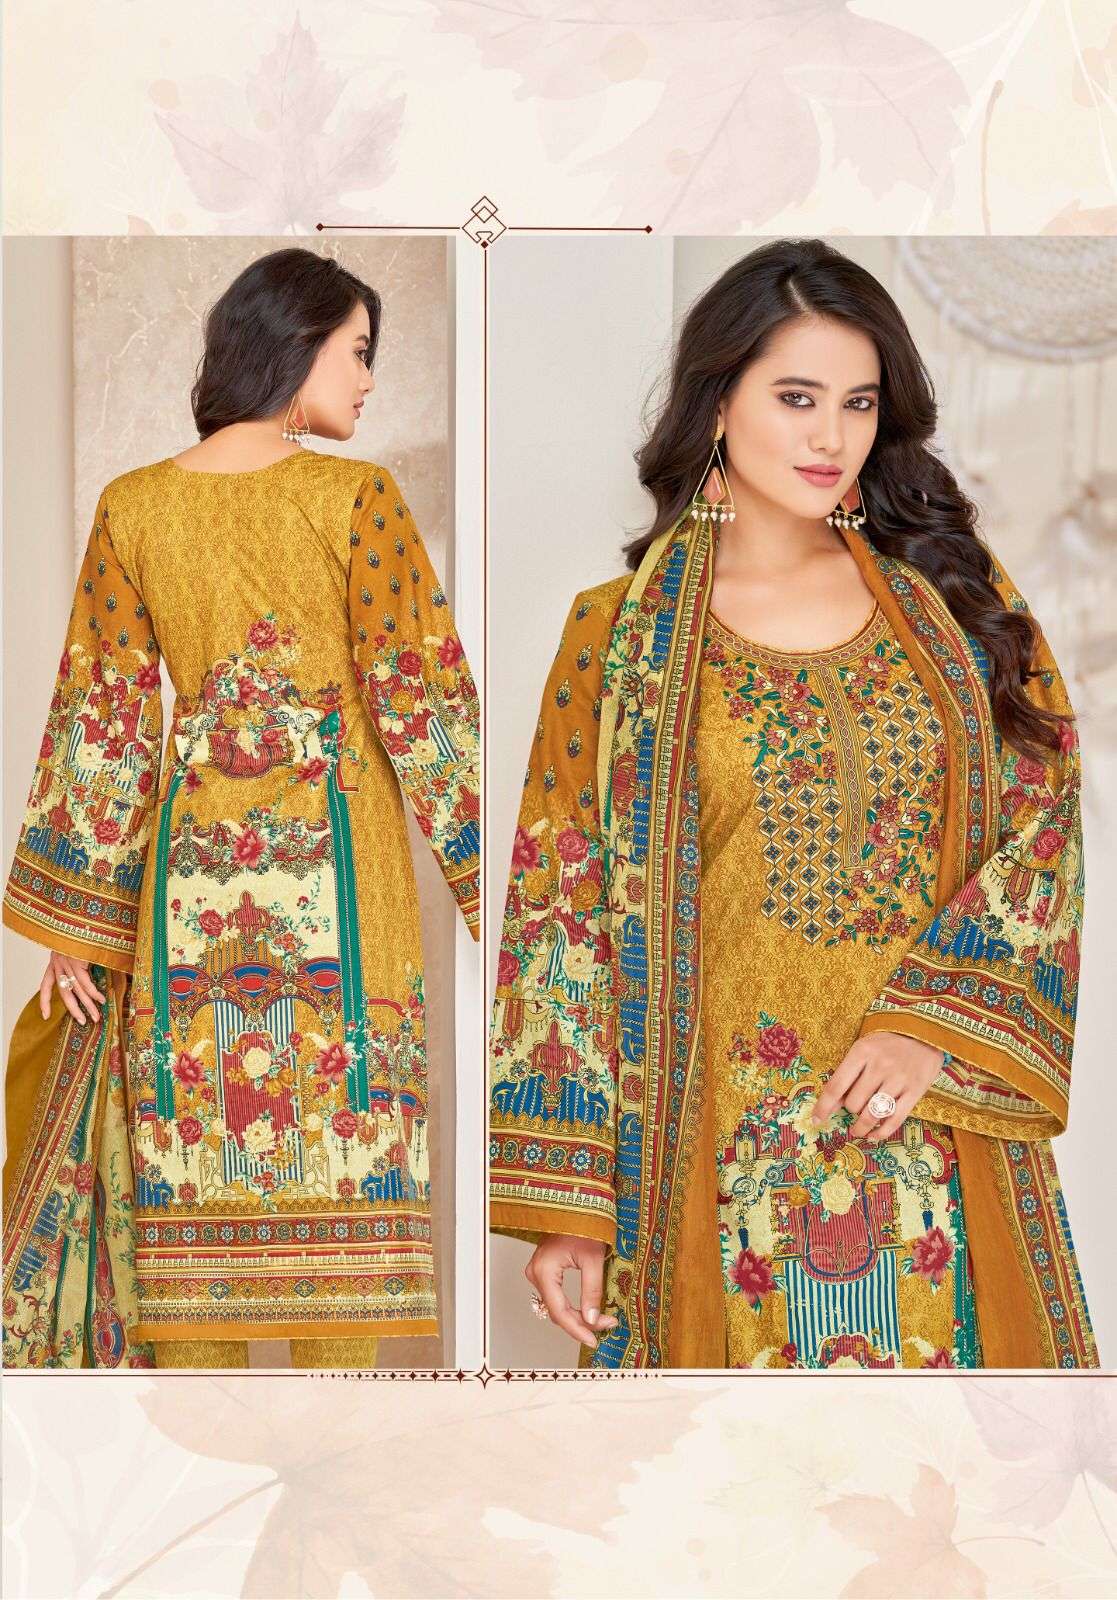 Buy online Ladies Suit from Suits & Dress material for Women by Mehak  Textile for ₹800 at 11% off